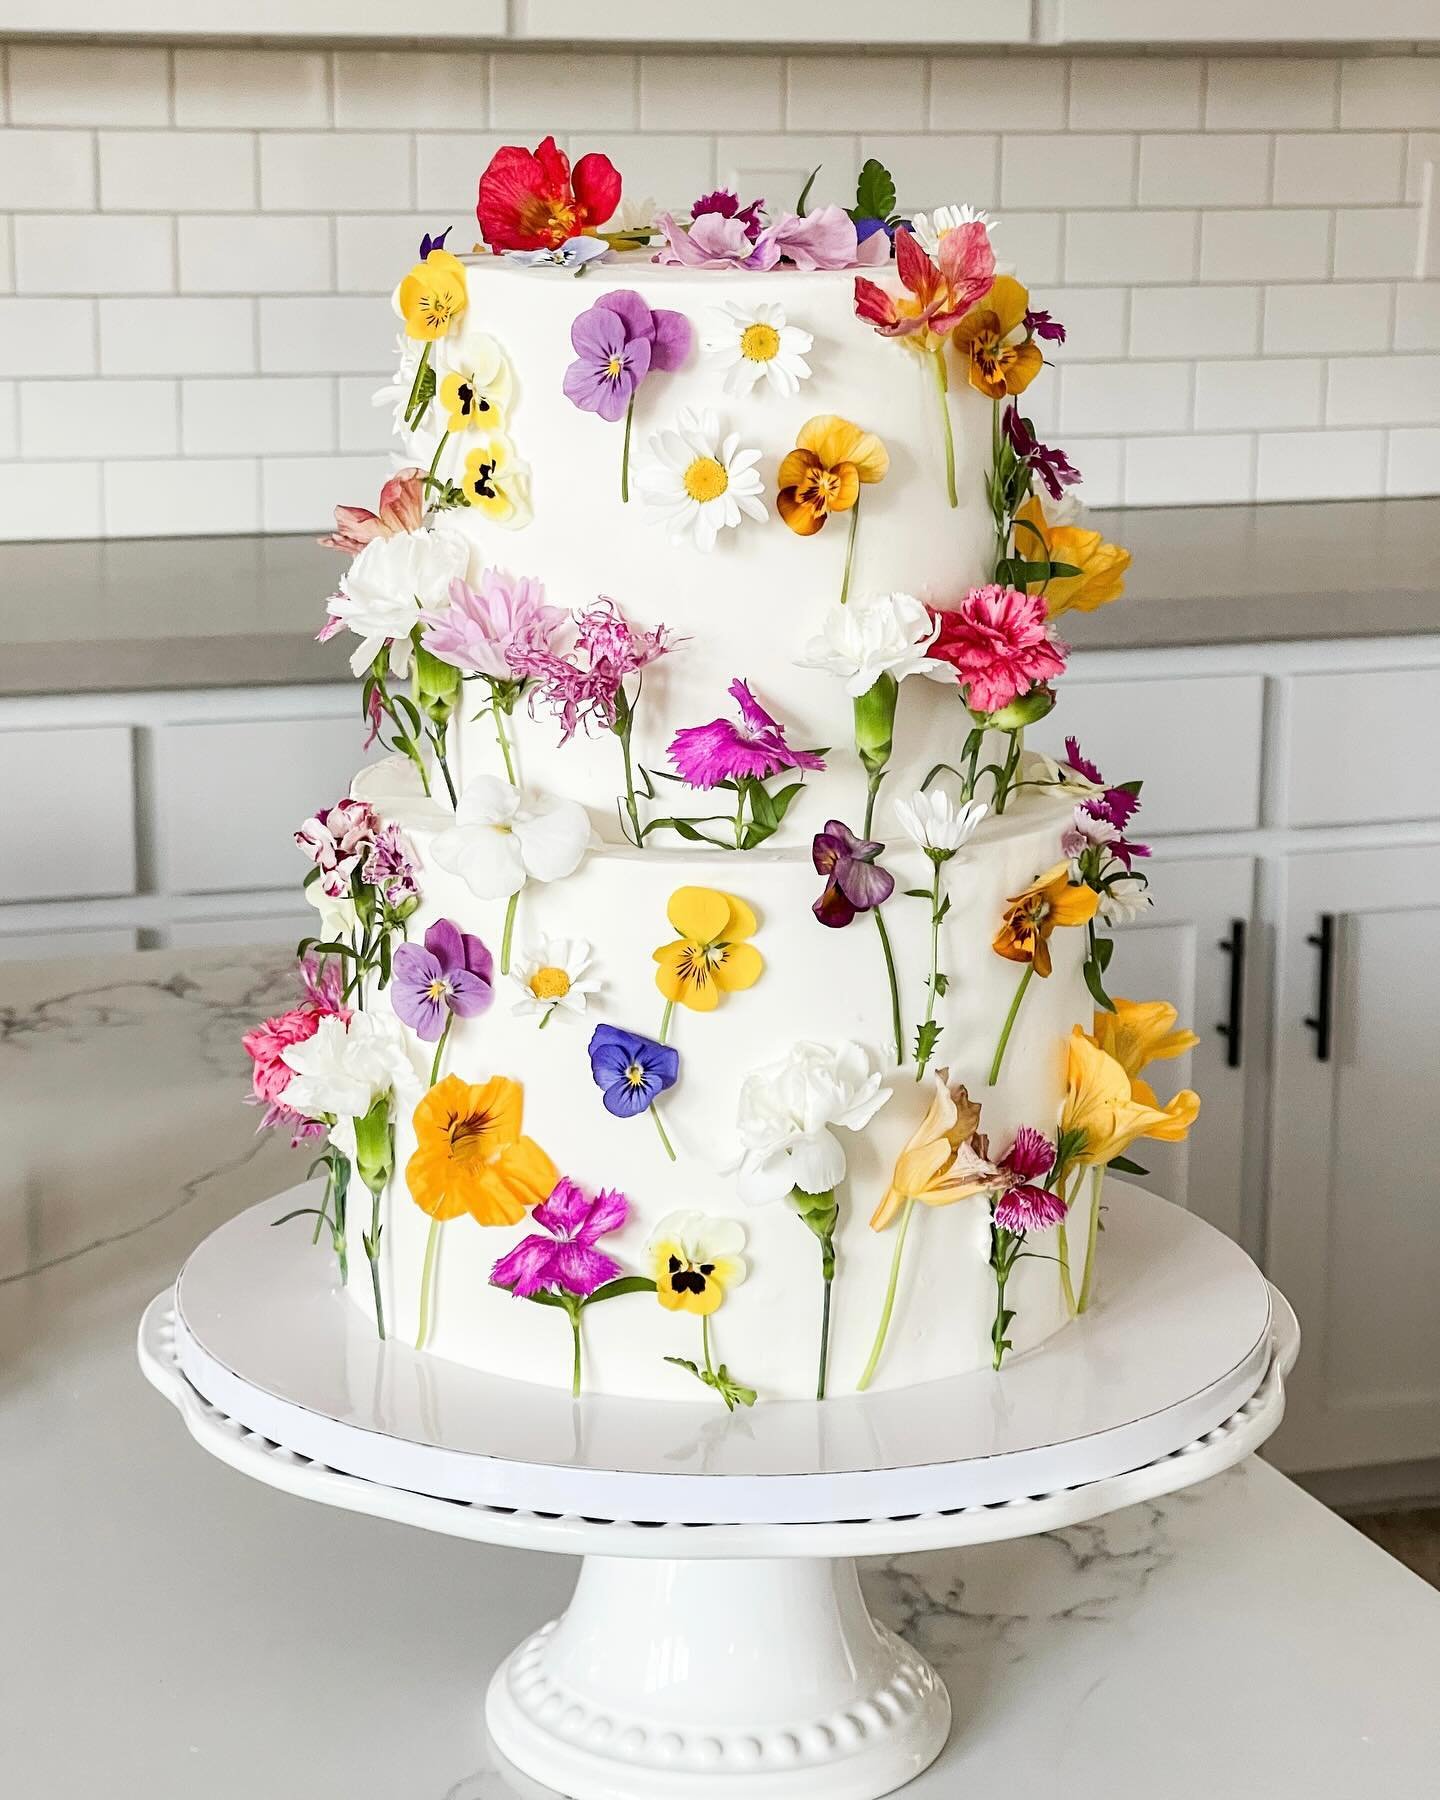 what&rsquo;s better than flowers? 🌸🌷🌼🪻

&hellip;not much! Maybe cake? 😉

Two Tier 6&rdquo; &amp; 8&rdquo; three layer red velvet cake with white buttercream covered in fresh @baskfarm edible floral ✨

#bridalshowercake #flowercake #edibleflowers